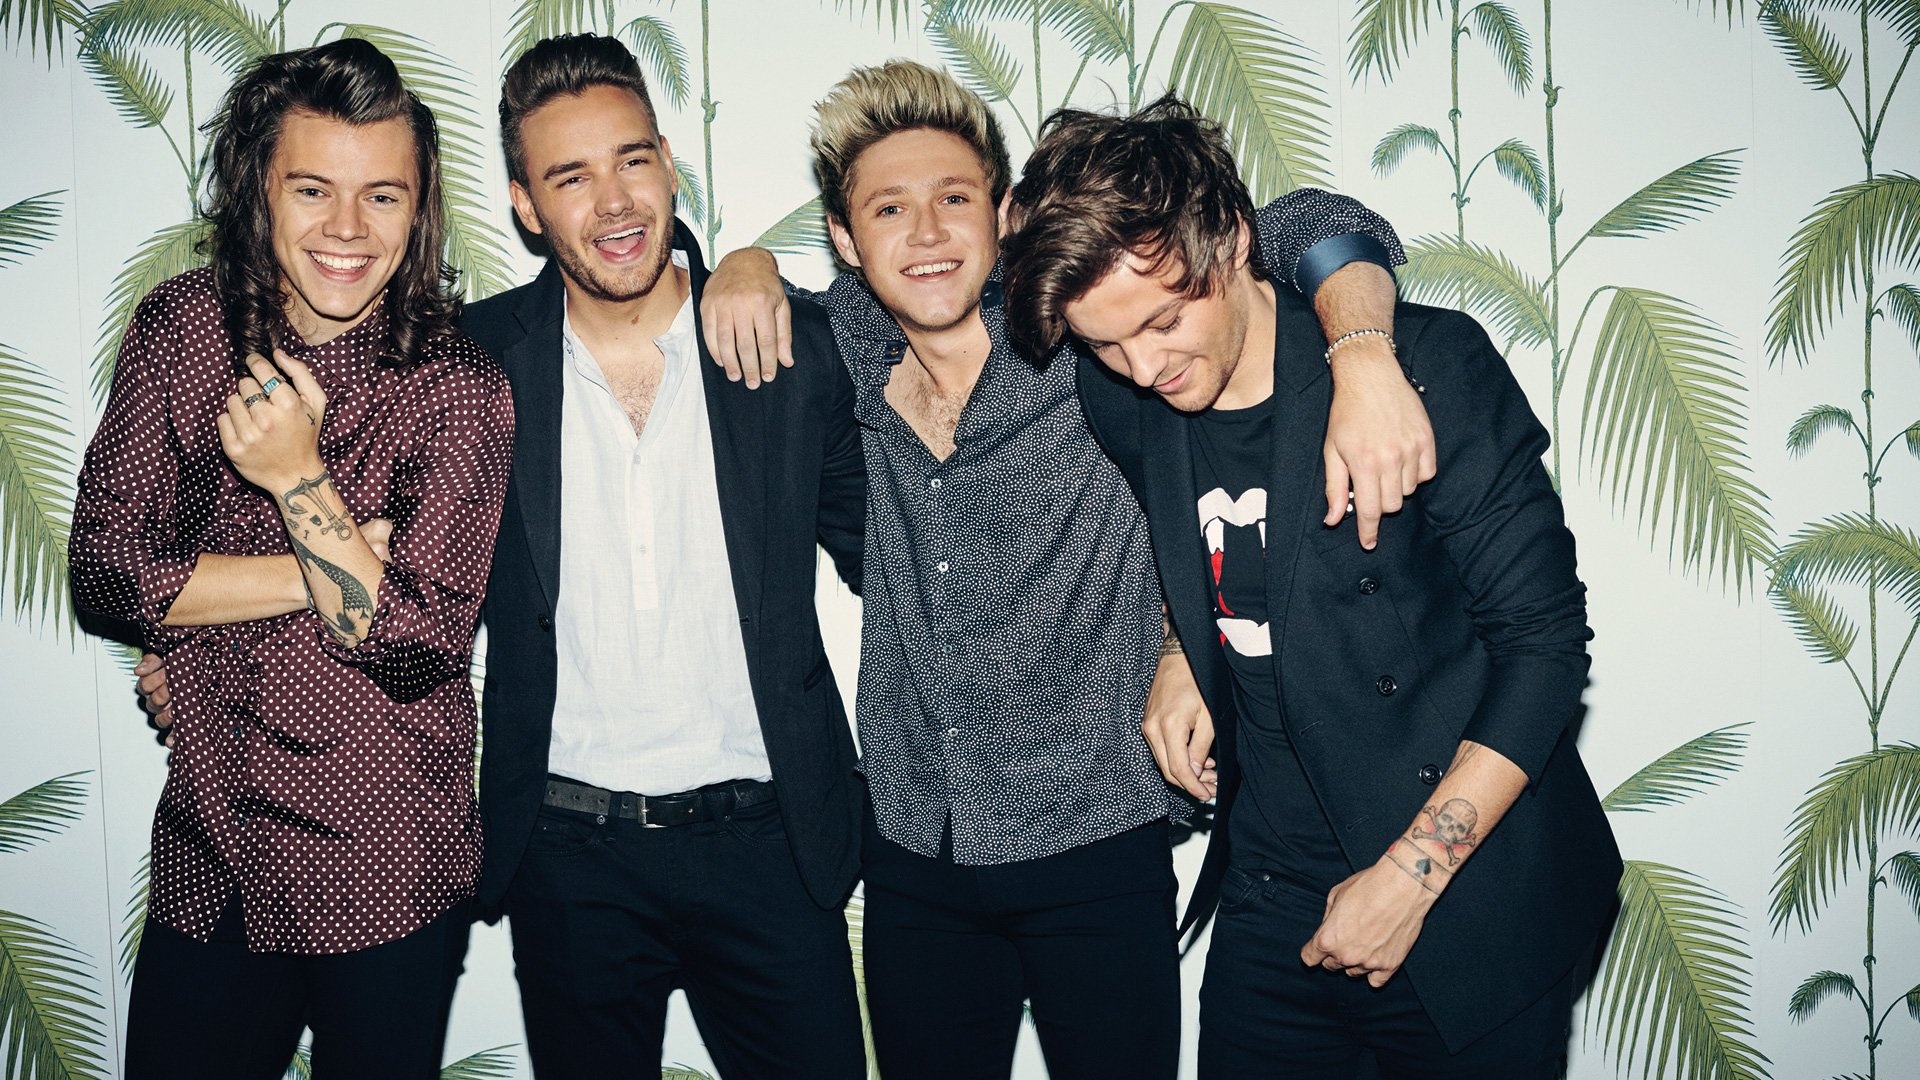 One Direction (Band): The second-highest earning celebrity under 30 according to Forbes, 2013. 1920x1080 Full HD Wallpaper.